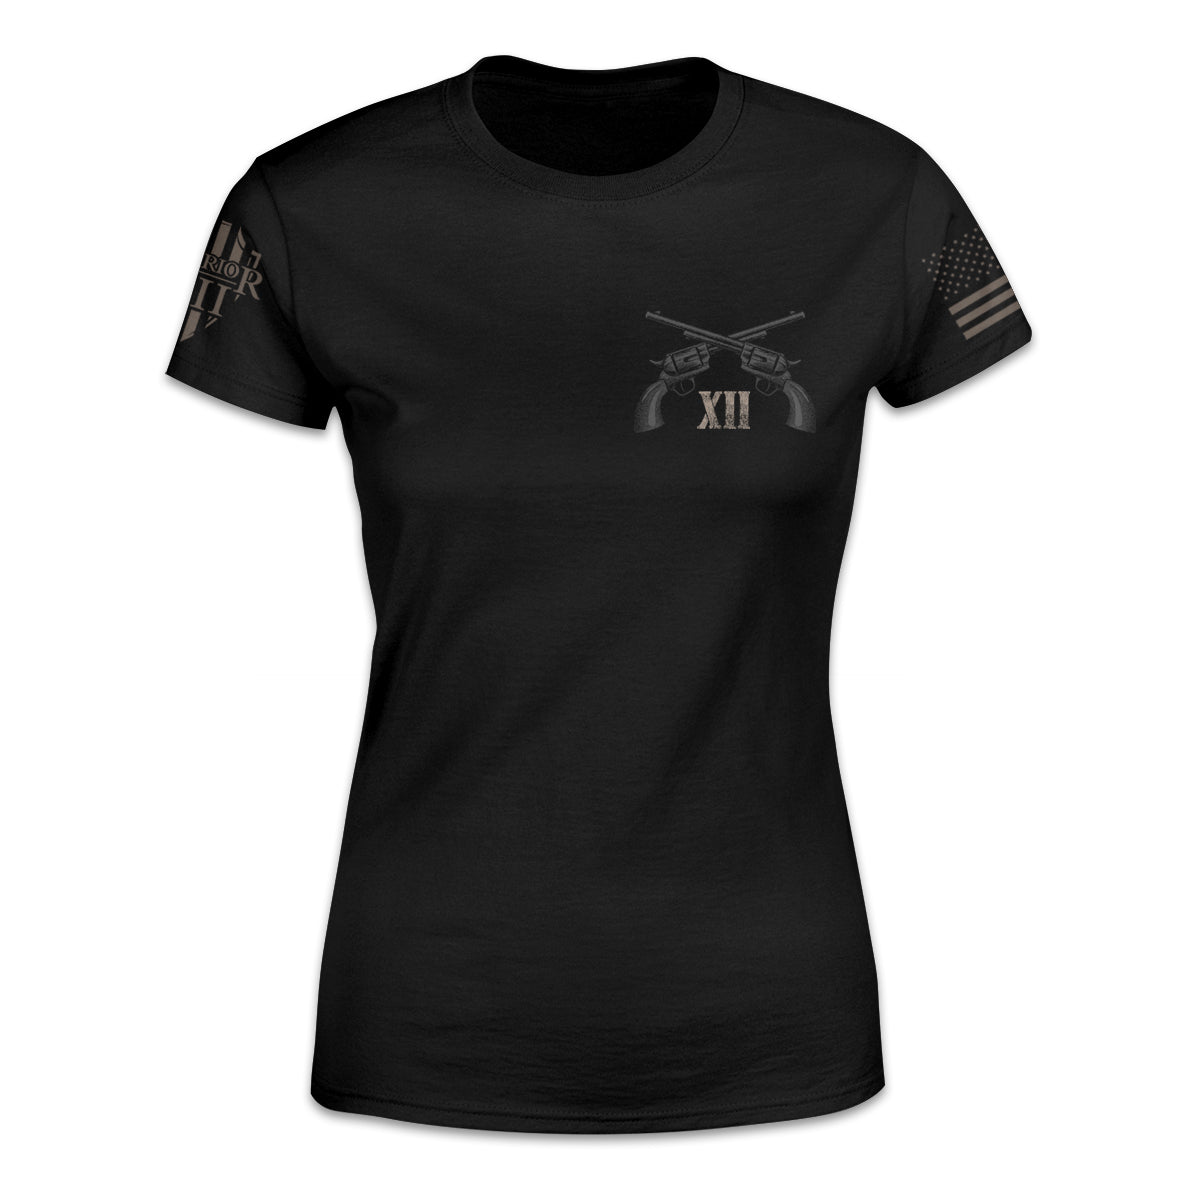 A black women's relaxed fit shirt with two pistols crossed over with the Roman numerals XII printed on the front of the shirt.